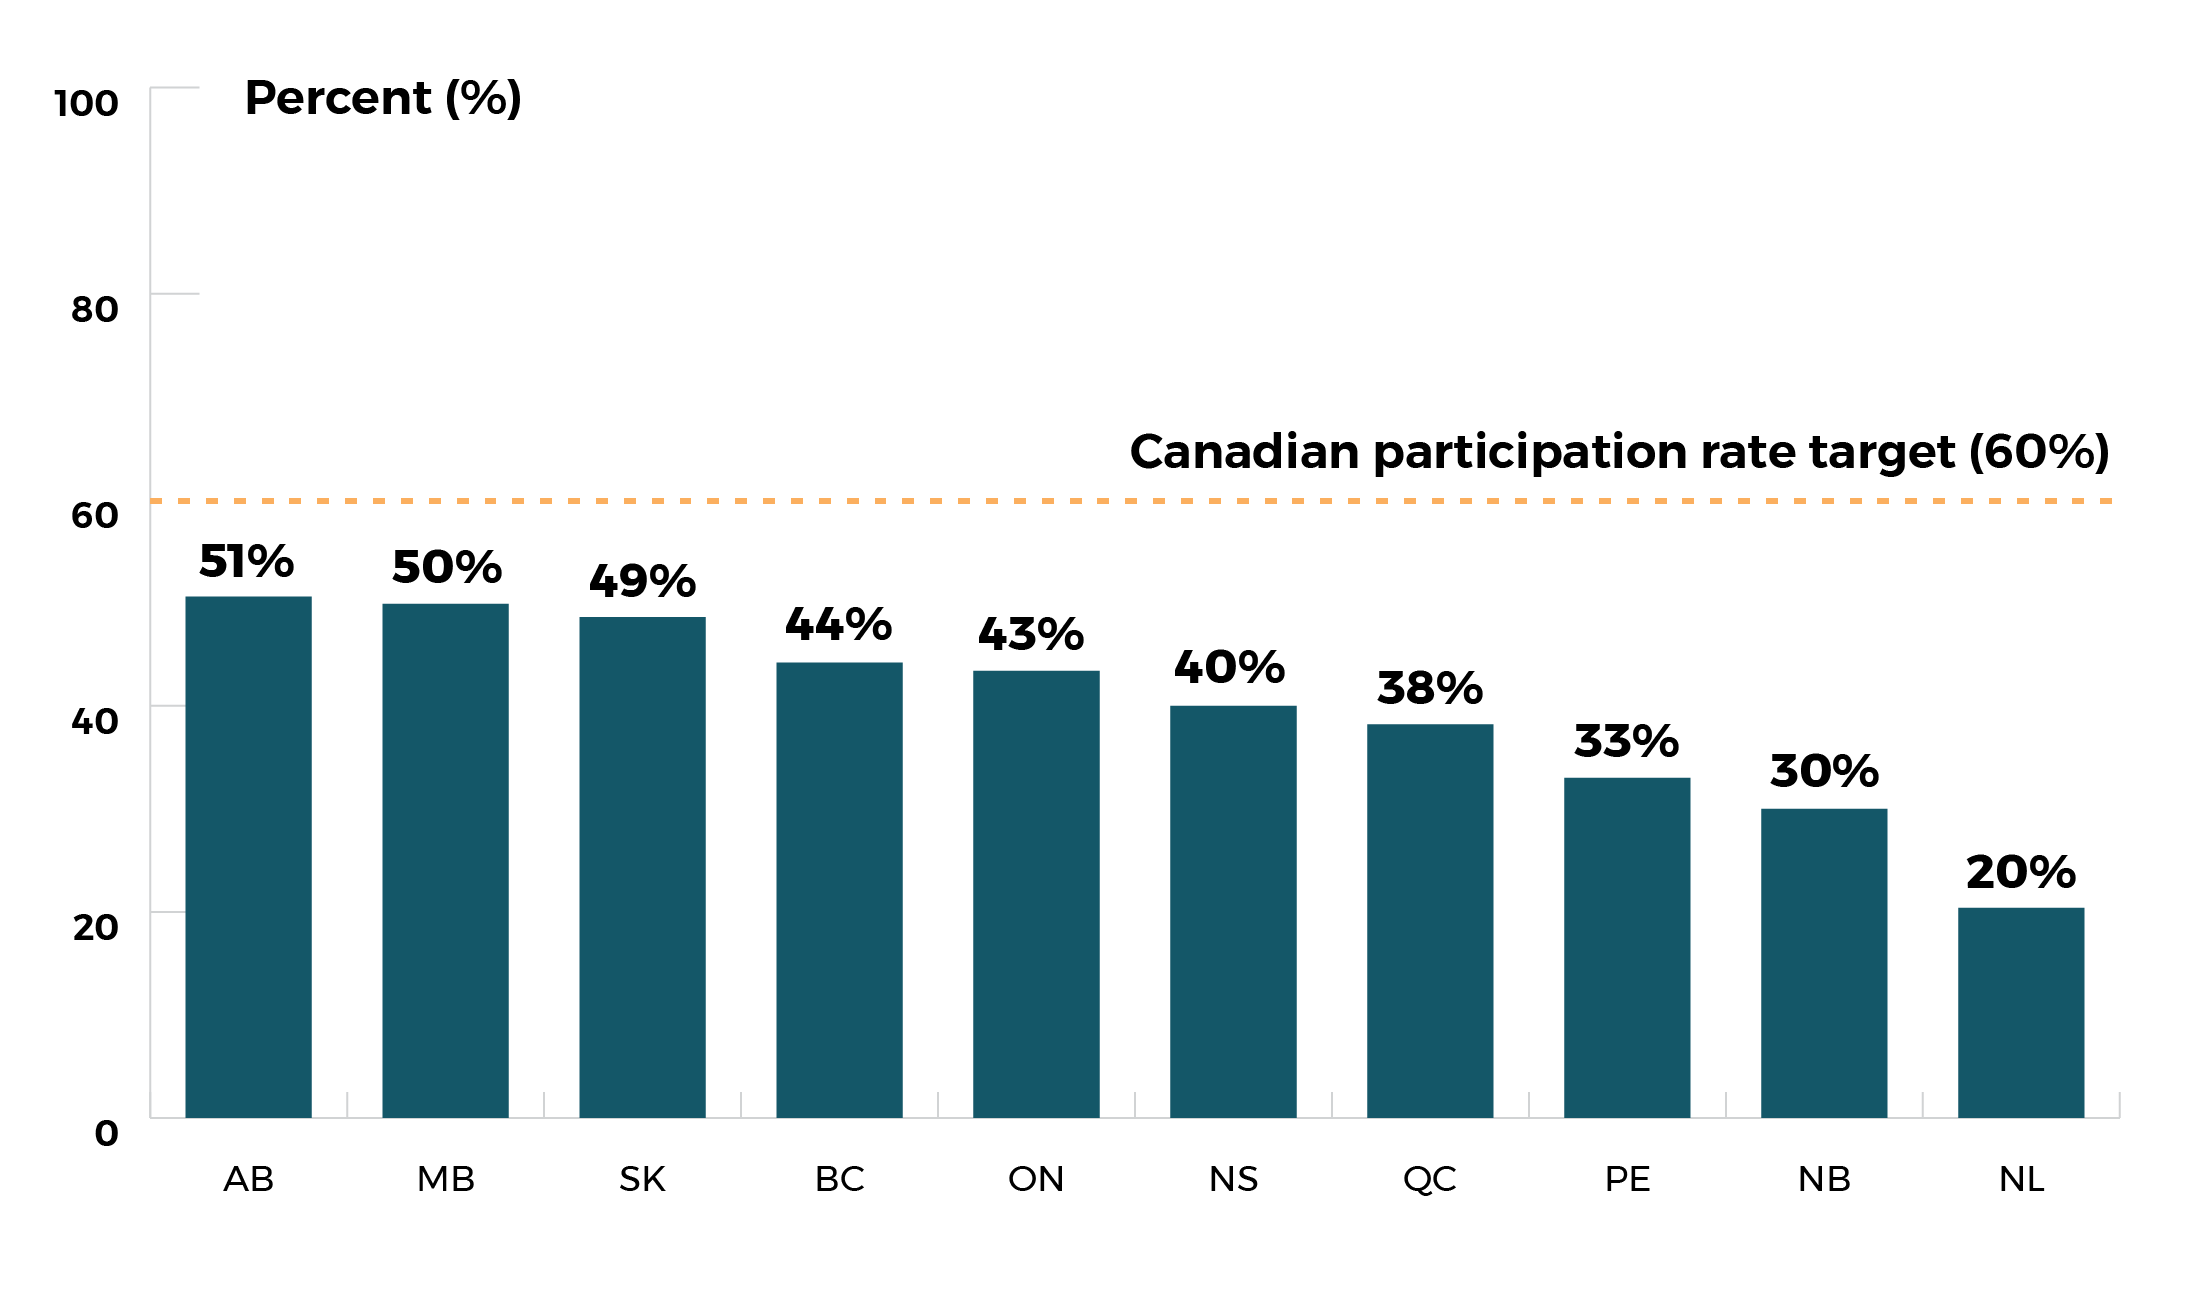 AB participation rate is 51%, MB 50%, SK 49%, BC 44%, ON 43%, NS 40%, QC 38%, PE 33%, NB 30%, NL 20%